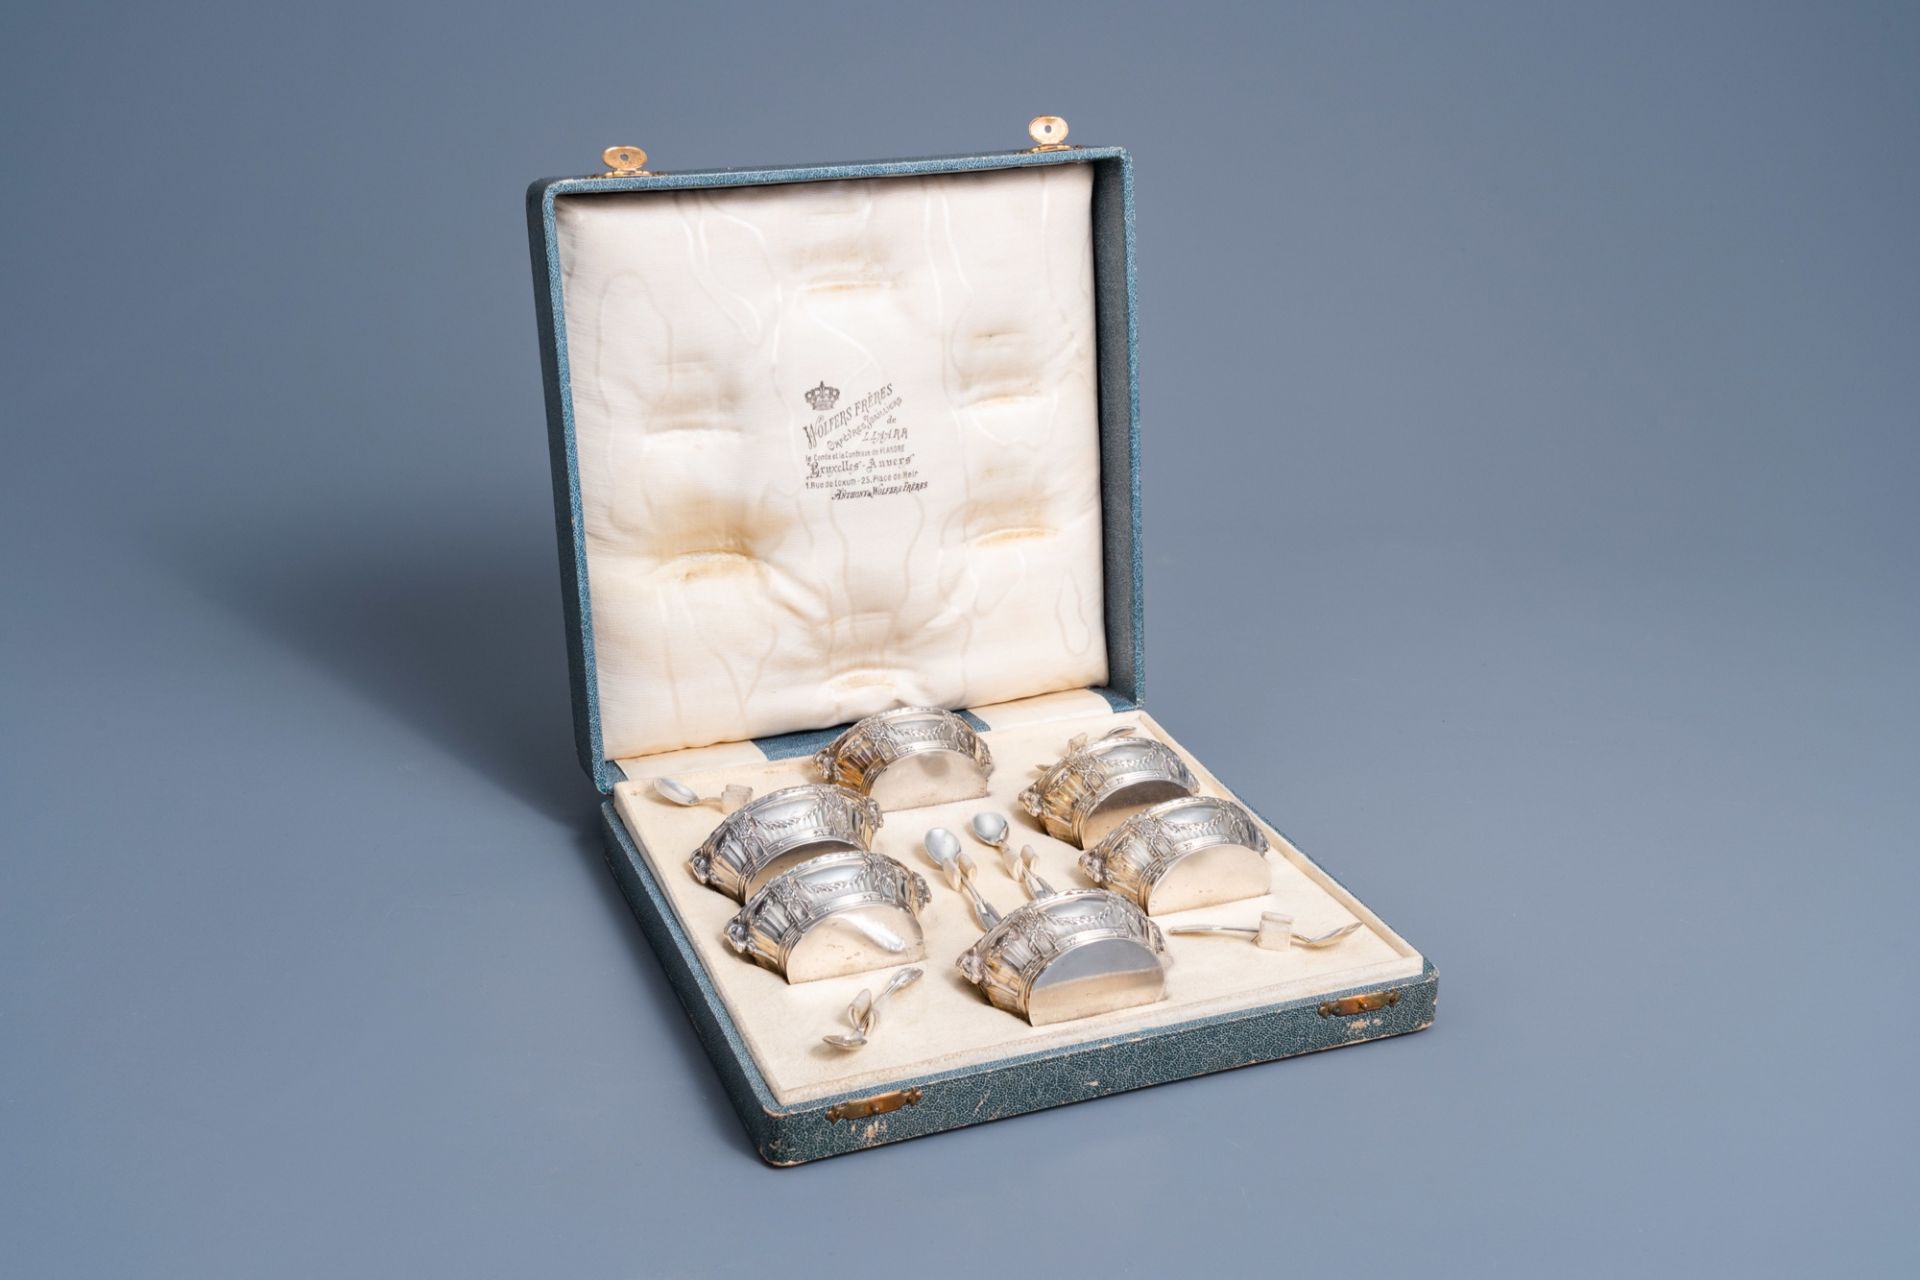 Six silver Louis XVI style salts with spoon with matching 'Wolfers Frres' case, 950/000, maker's ma